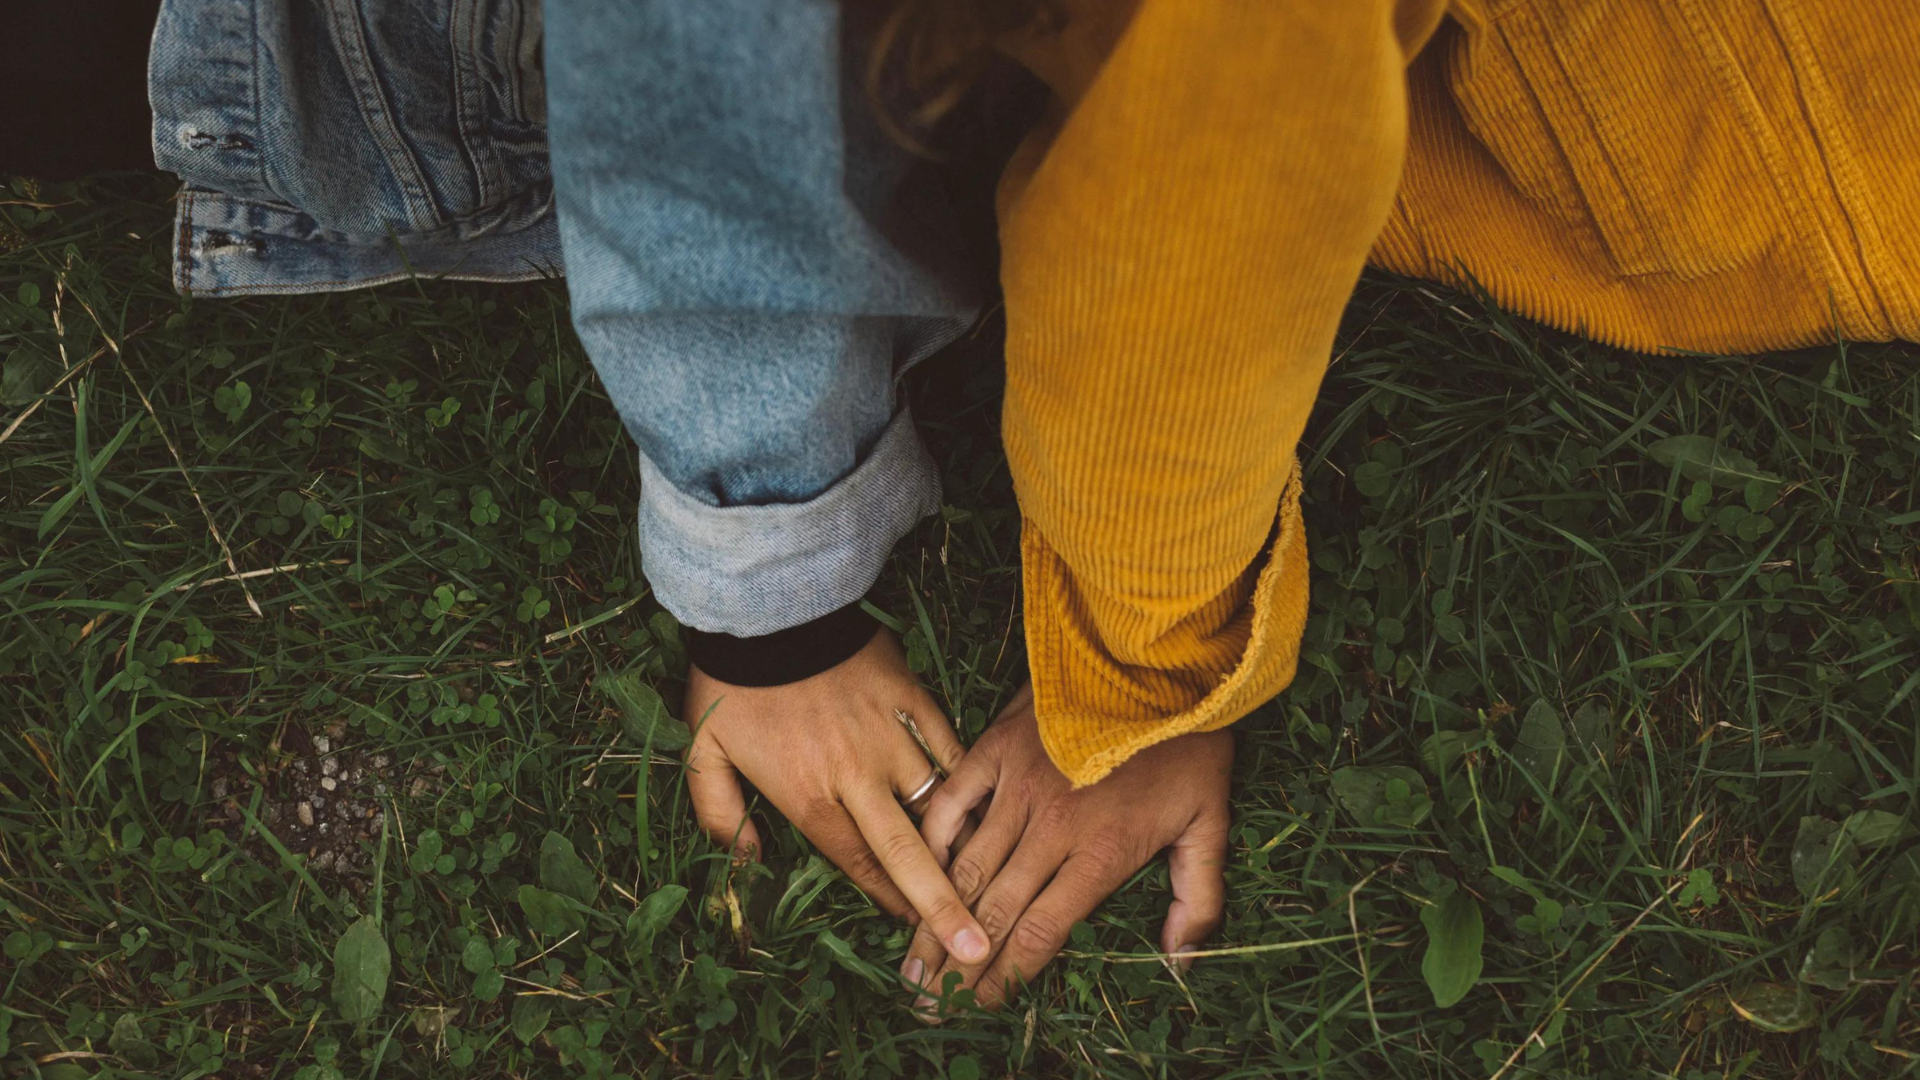 Two people sitting on the grass and holding their hands